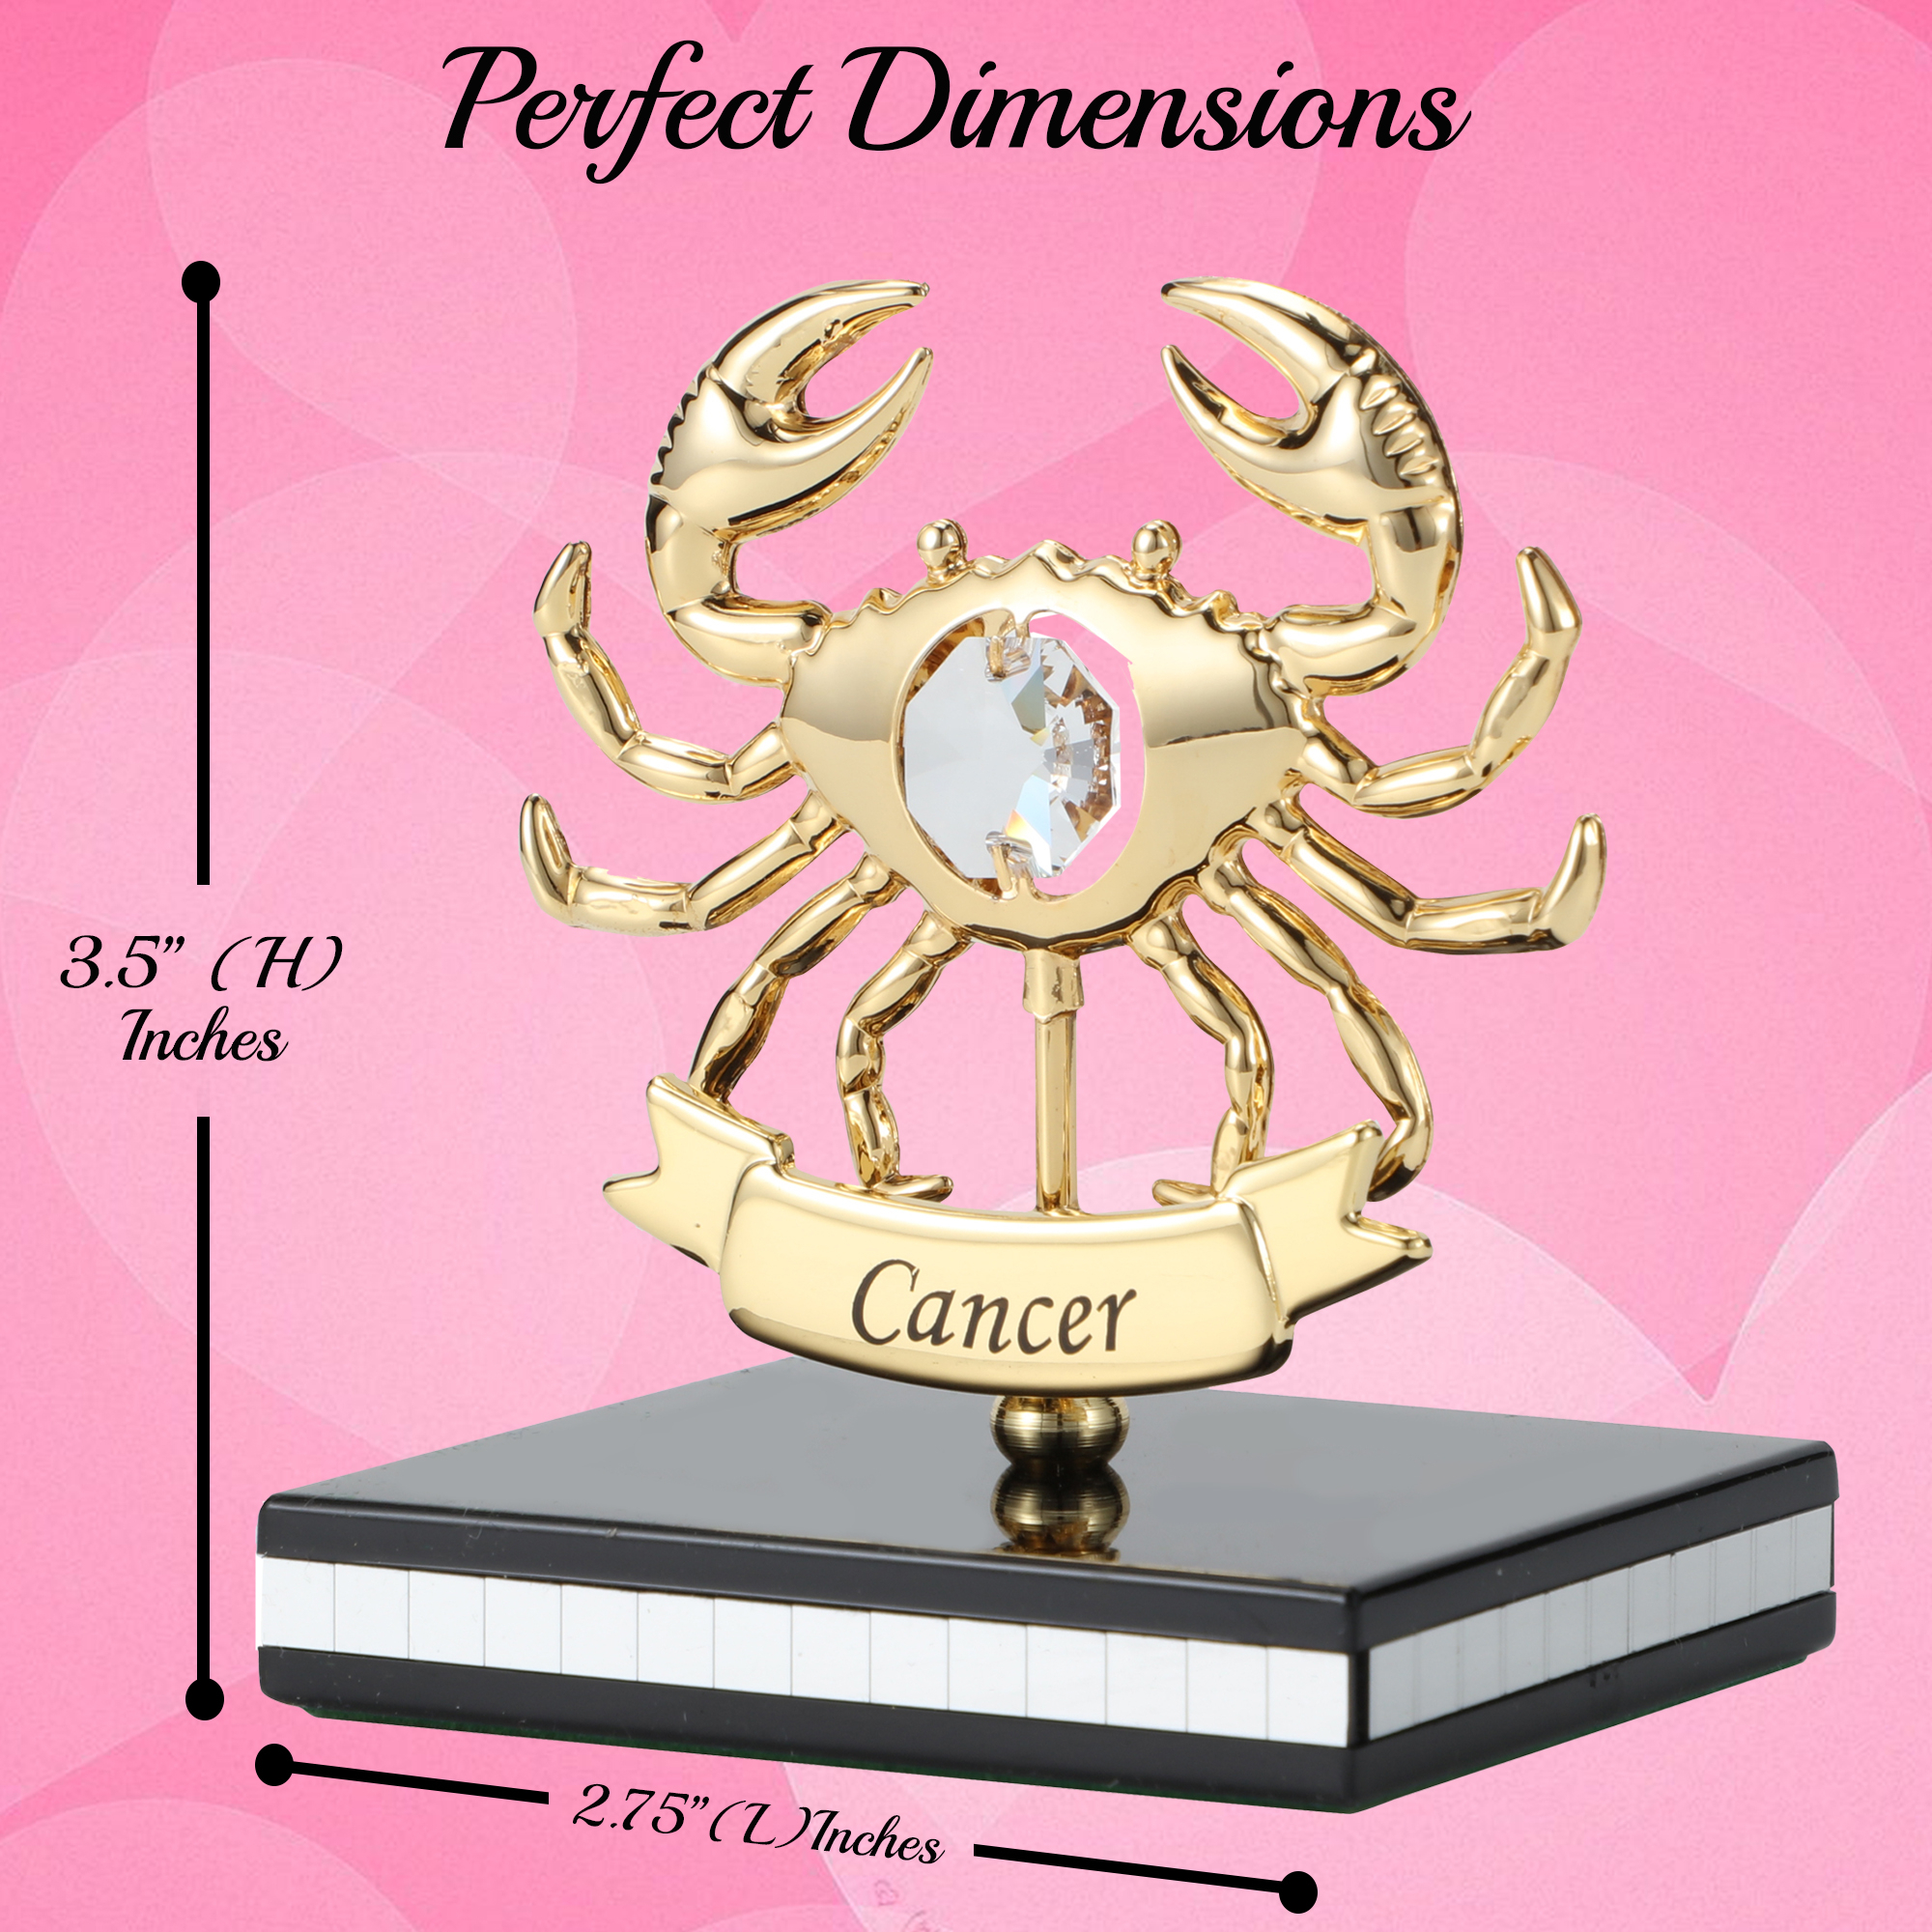 Matashi 24K Gold Plated Zodiac Astrological Sign Cancer Figurine Statuette On Stand Studded With Crystals Gift For Mom Girlfriend Wife Dad